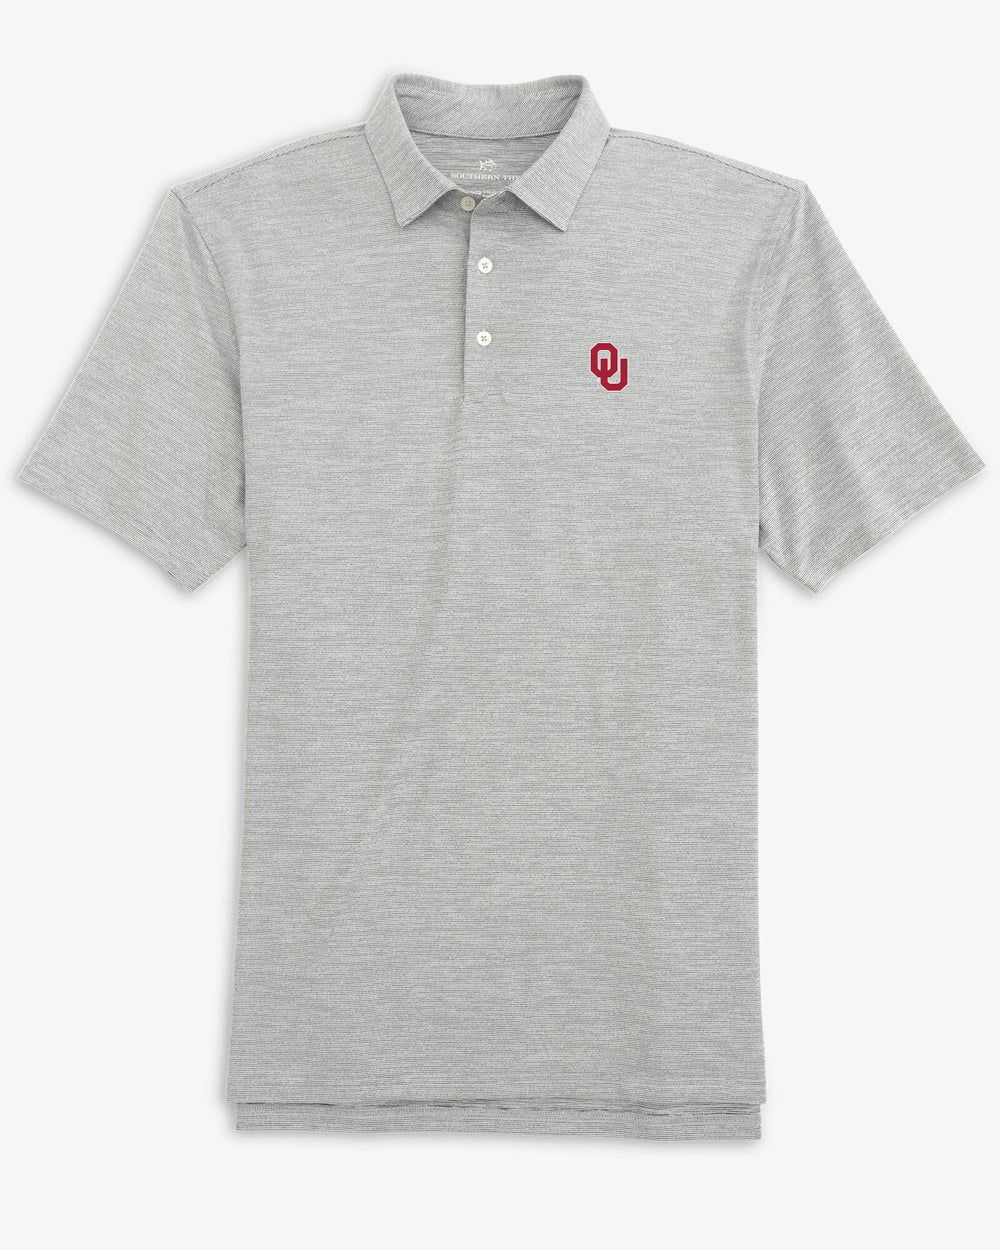 The front view of the Oklahoma Sooners Driver Spacedye Polo Shirt by Southern Tide - Black